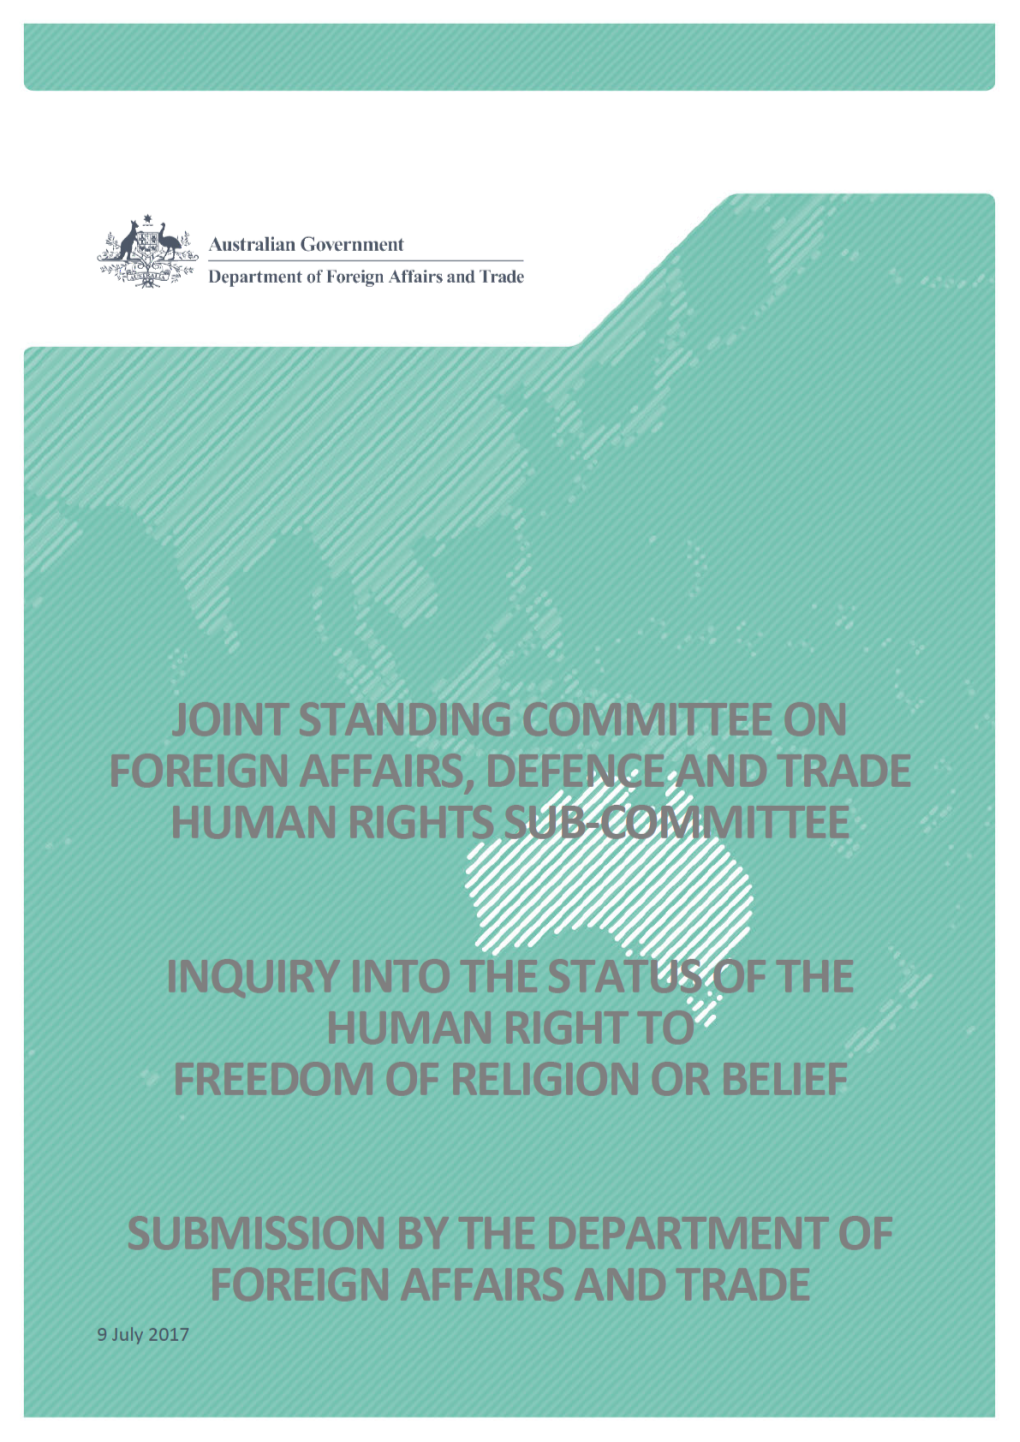 Inquiry Into the Status of the Human Right to Freedom of Religion Or Belief